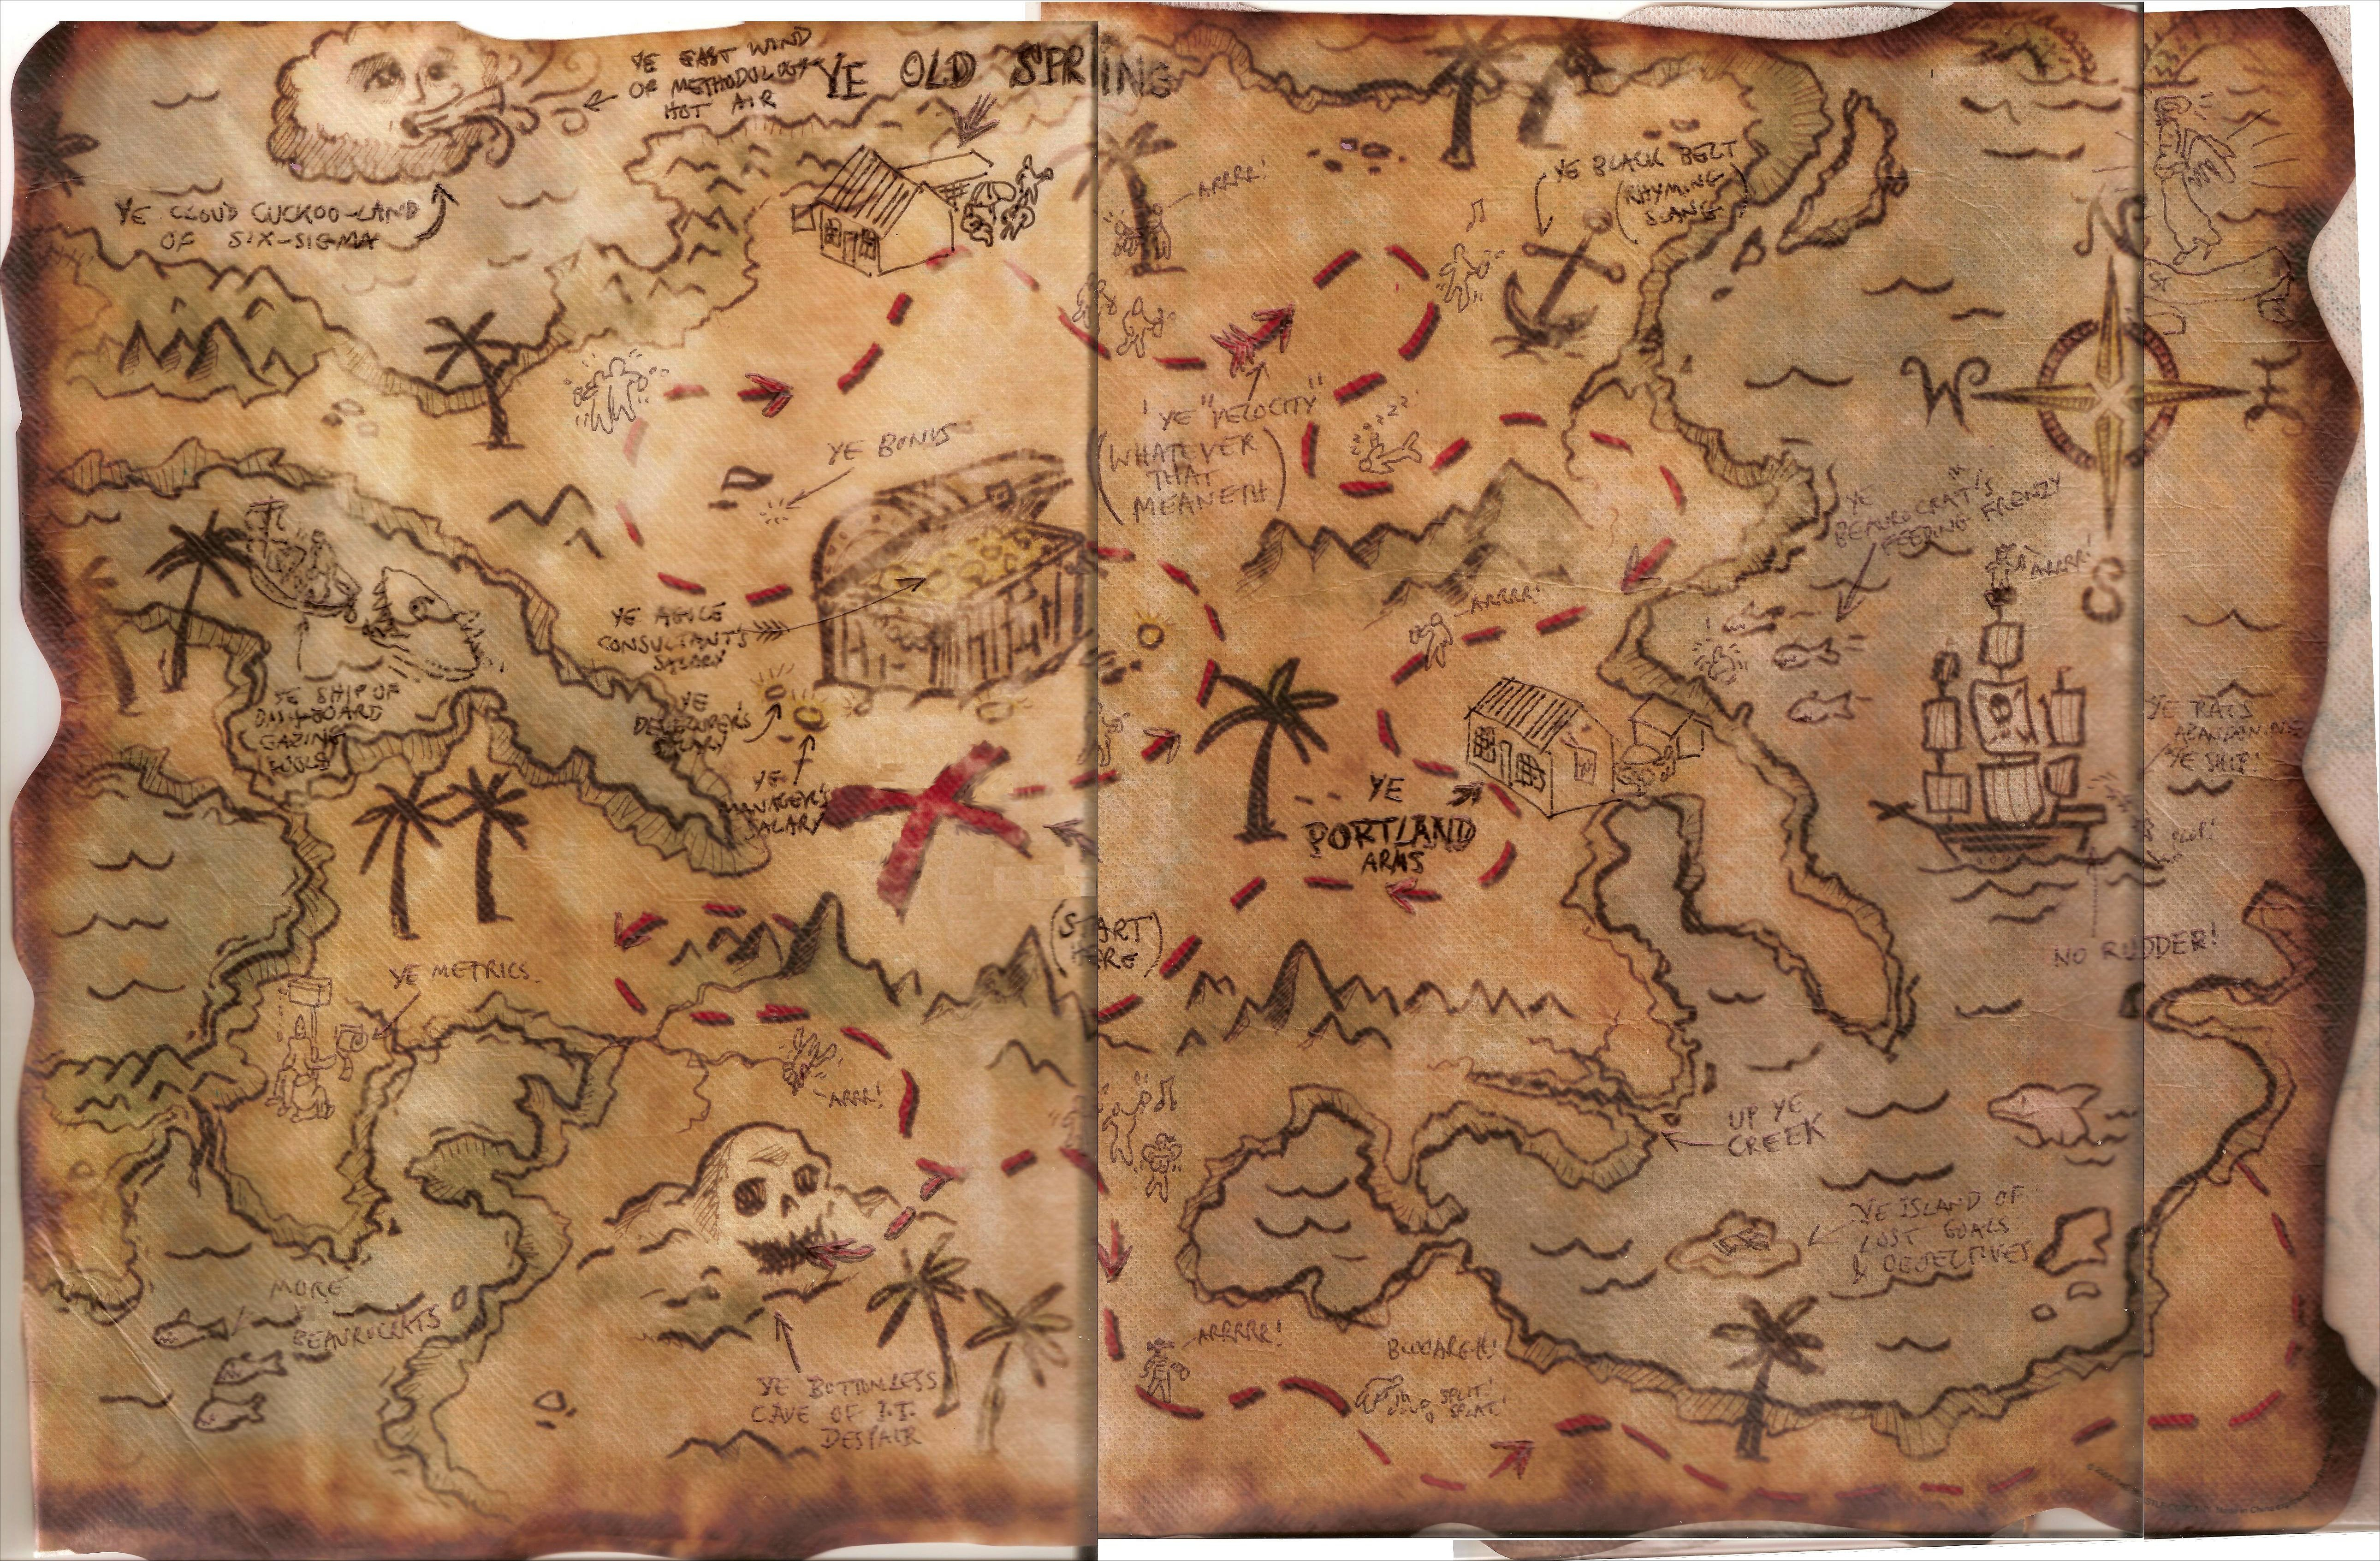 Free Pictures Of A Pirate Map, Download Free Clip Art, Free Clip Art - Free Printable Pirate Maps